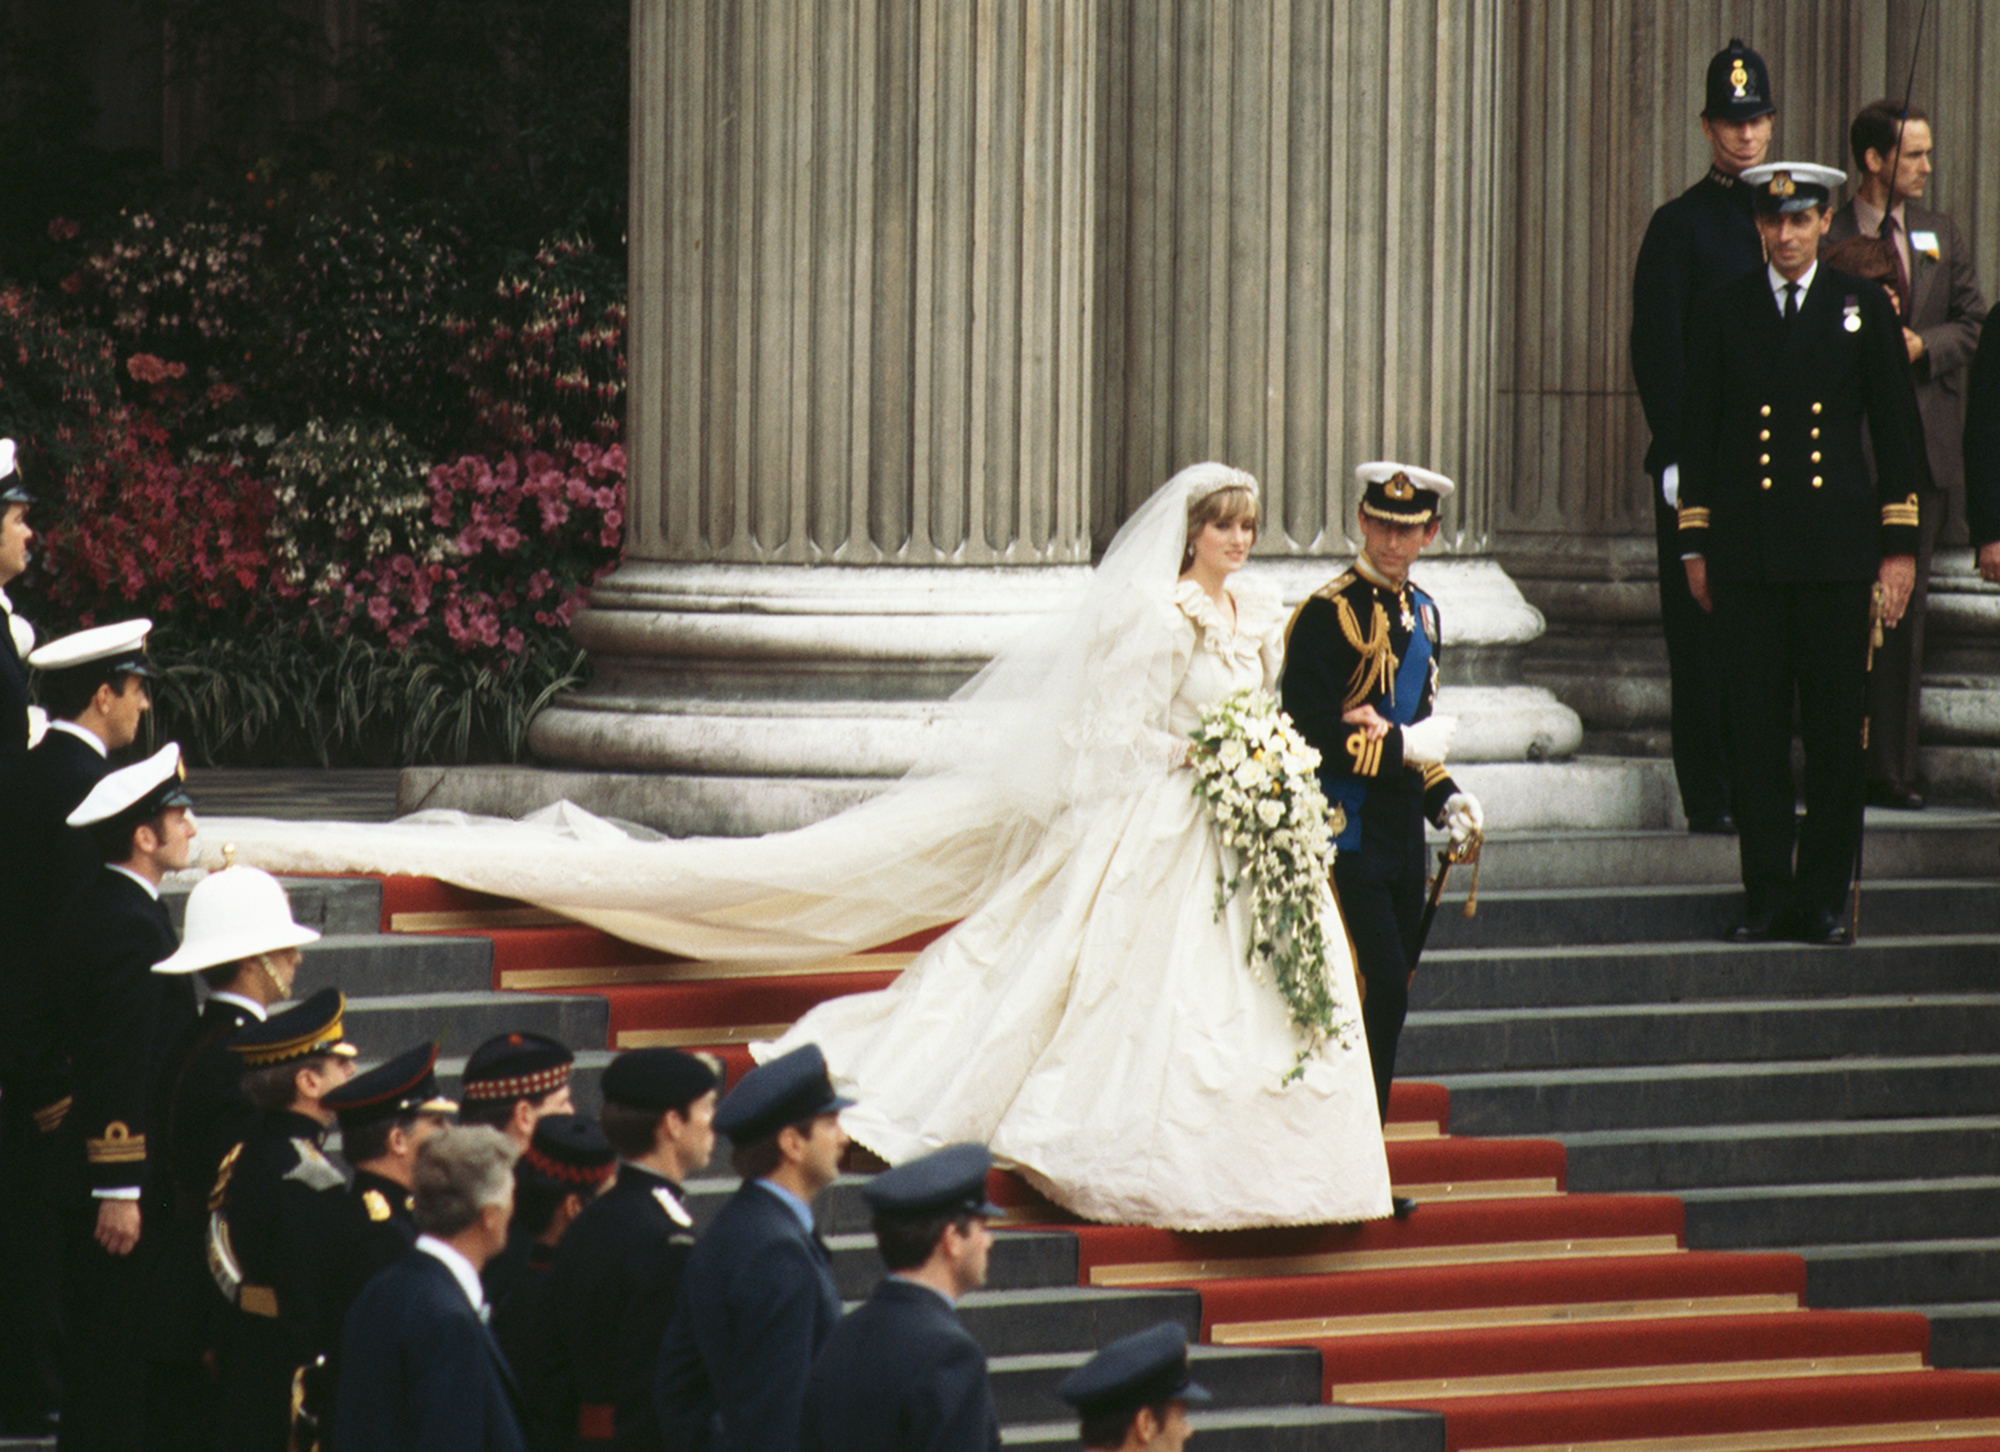 The Prince and Princess of Wales leave St Paul's Cathedral after their wedding, 29th July 1981